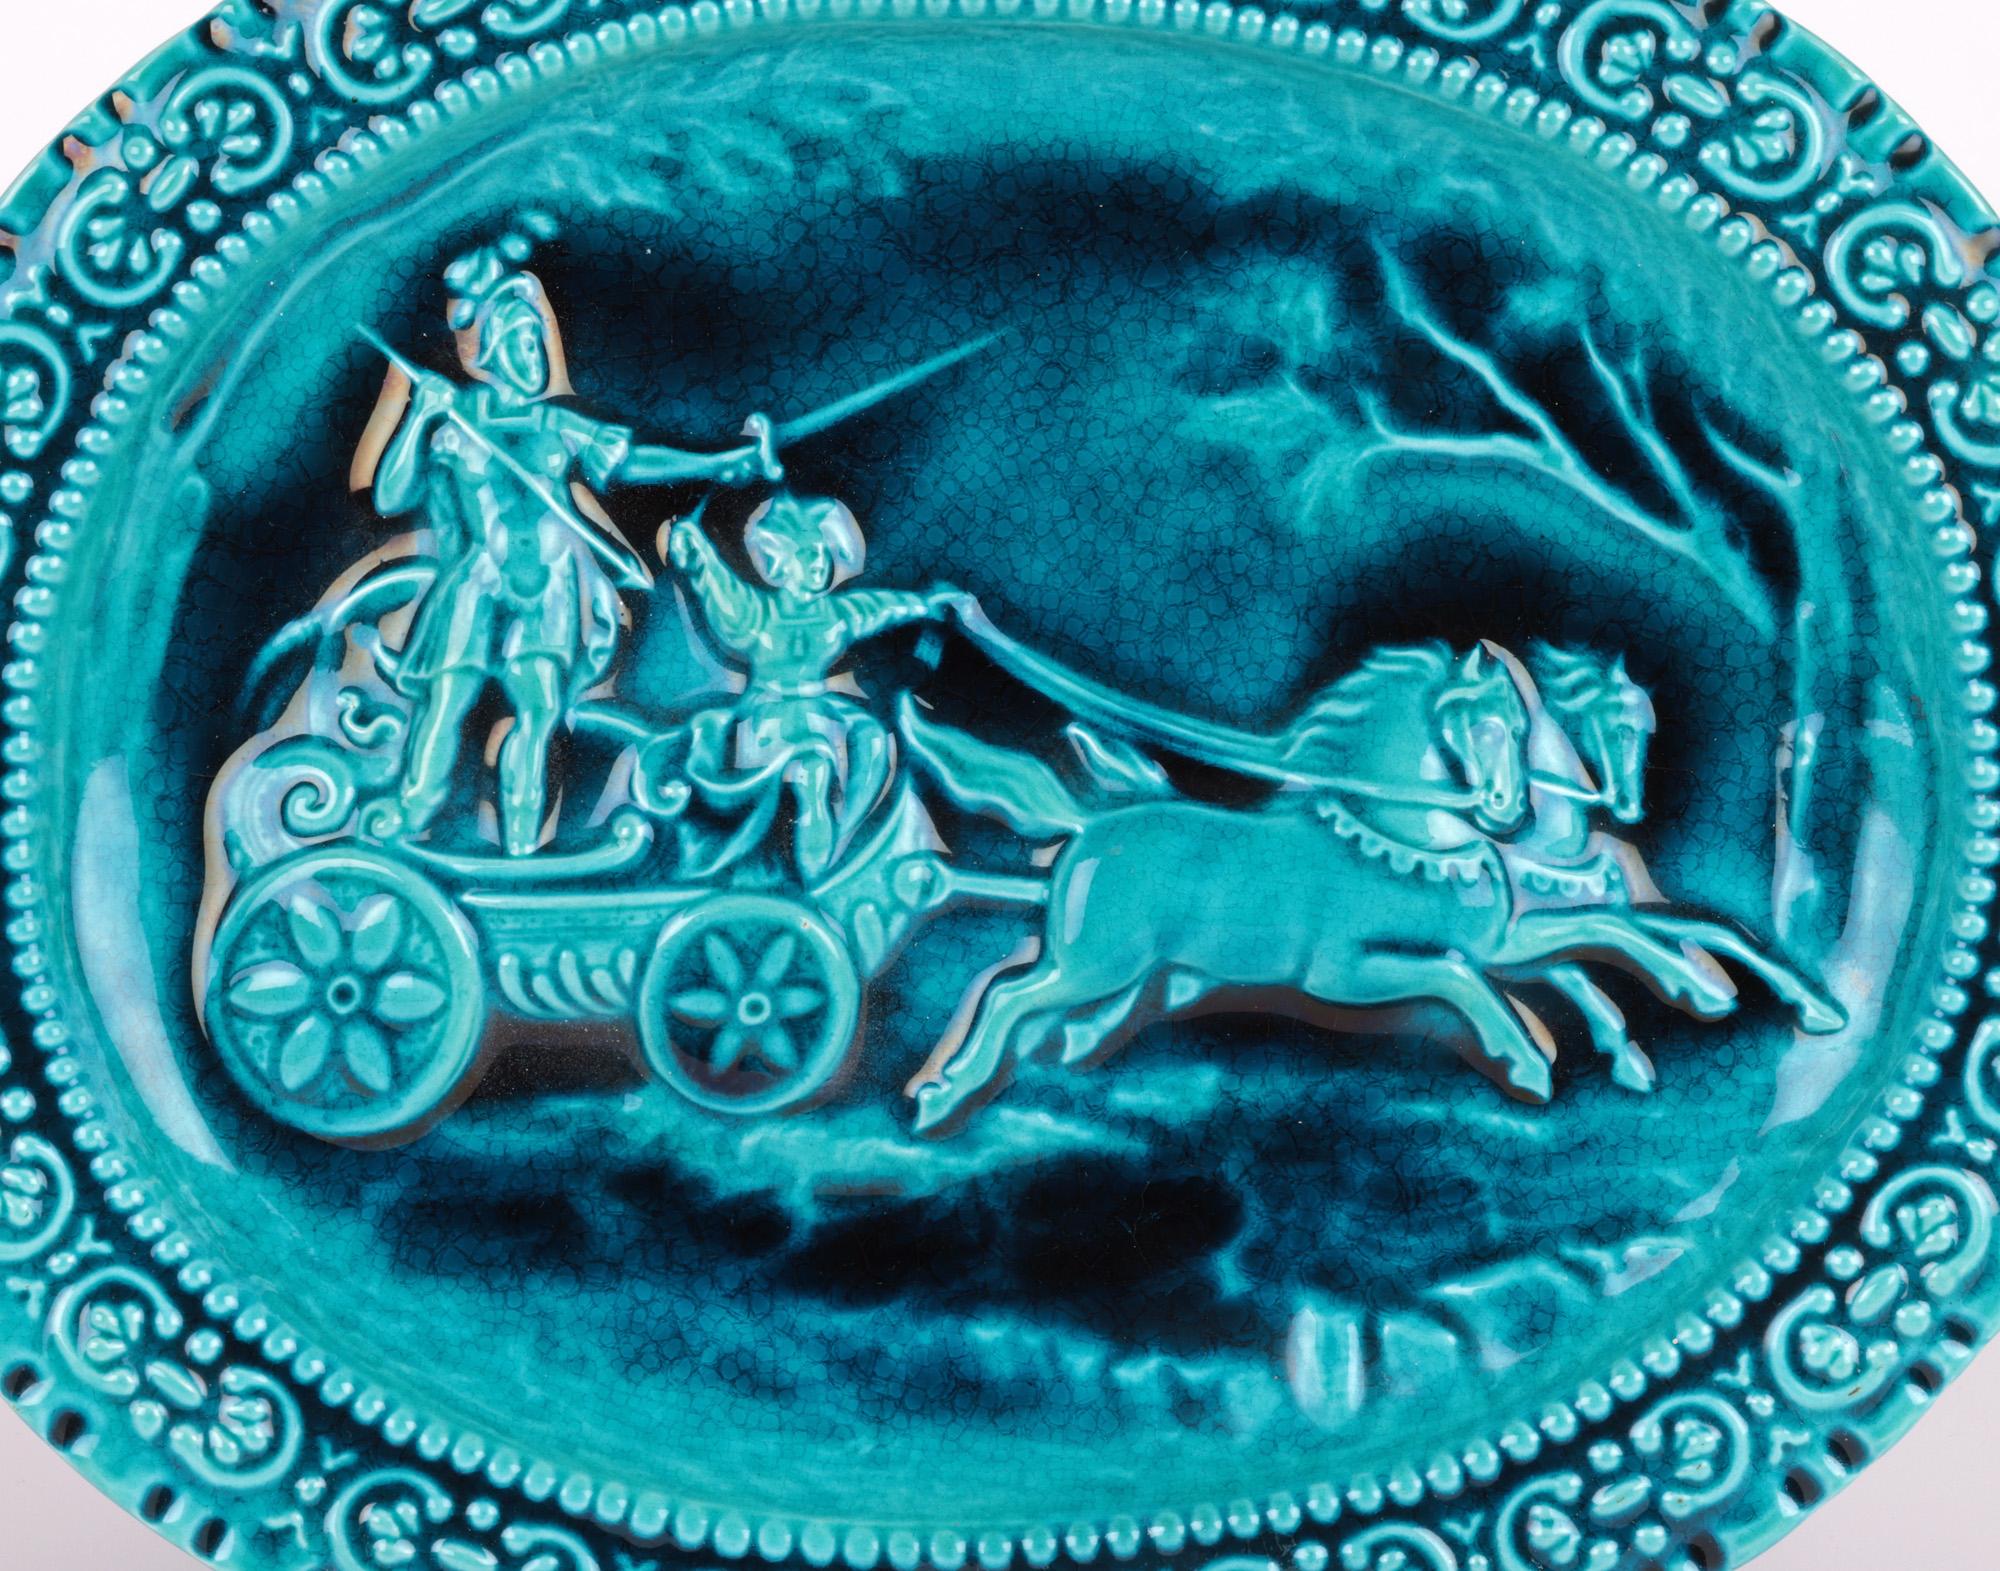 Maw & Co Walter Crane Majolica Chariot Art Pottery Plaque For Sale 4